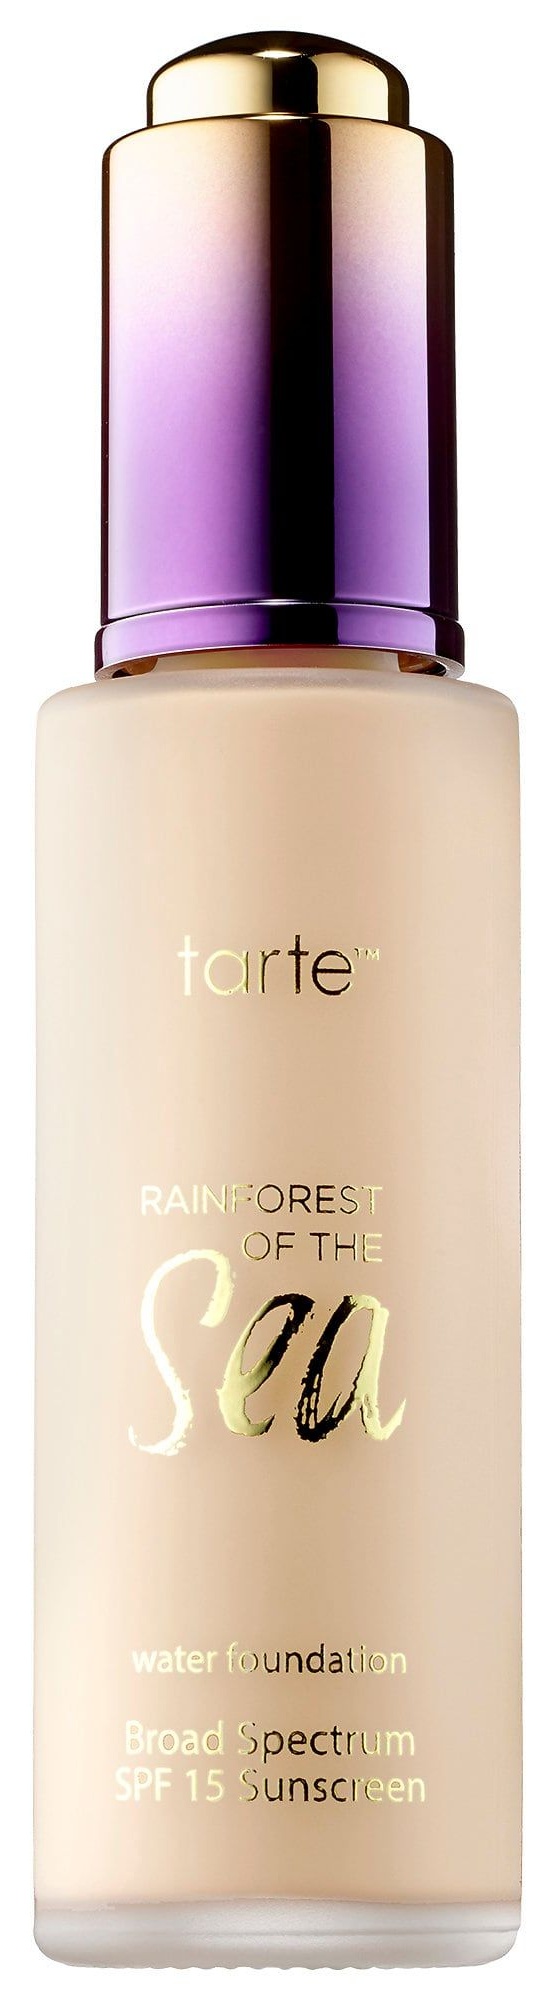 Tarte Water Foundation Broad Spectrum Spf 15 - Rainforest Of The Sea™ Collection